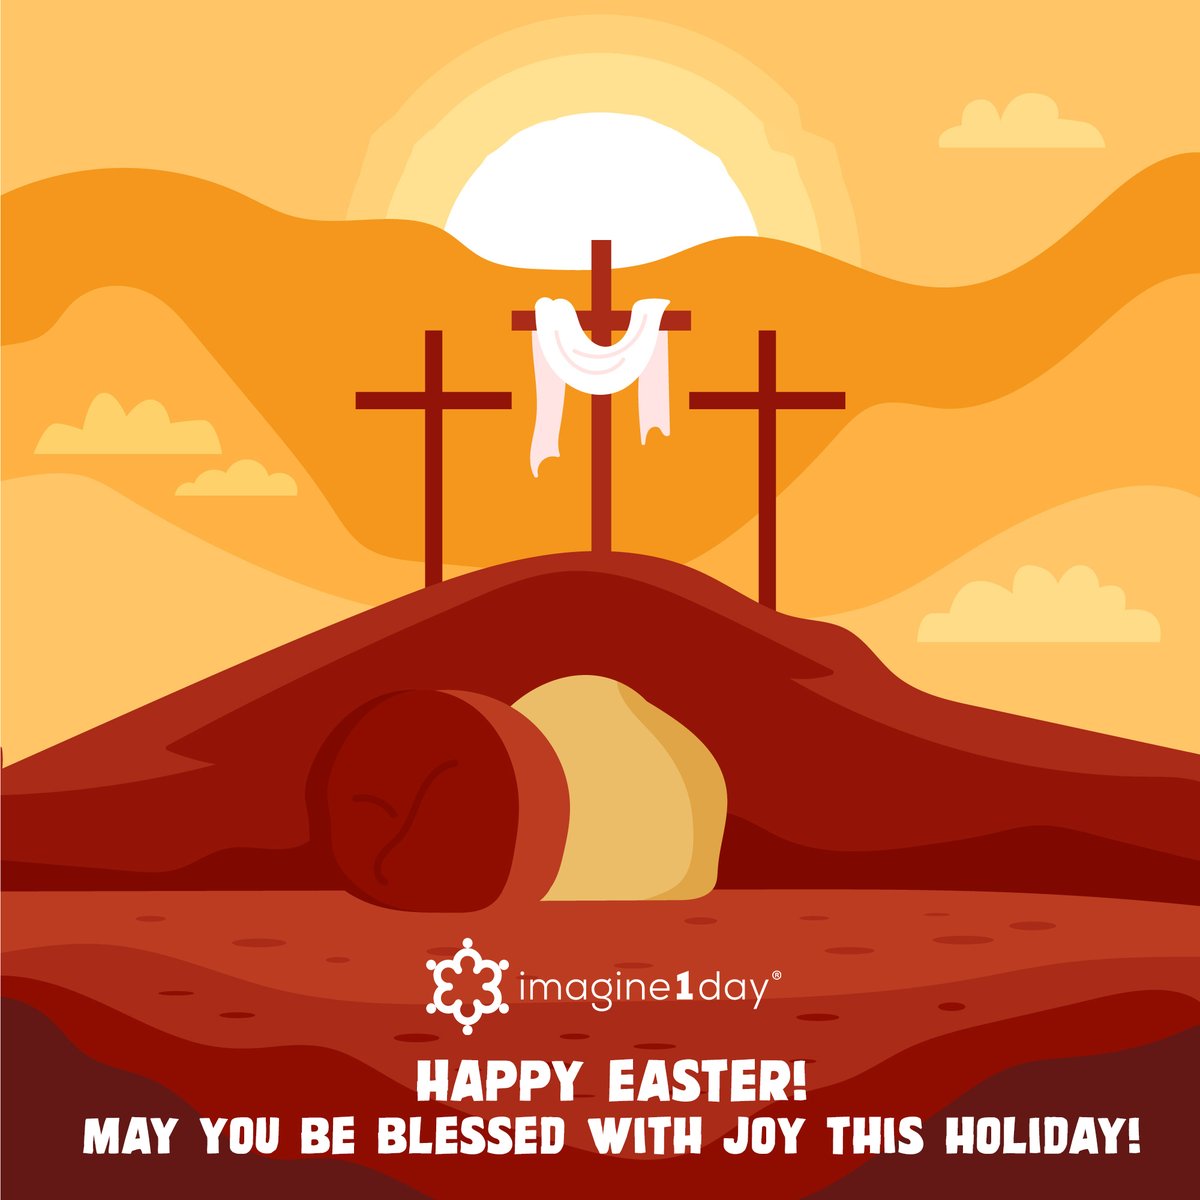 HAPPY EASTER! --------- Happy holidays to you and your family! Wishing you all joy and blessings during this special time. #happyeaster2024